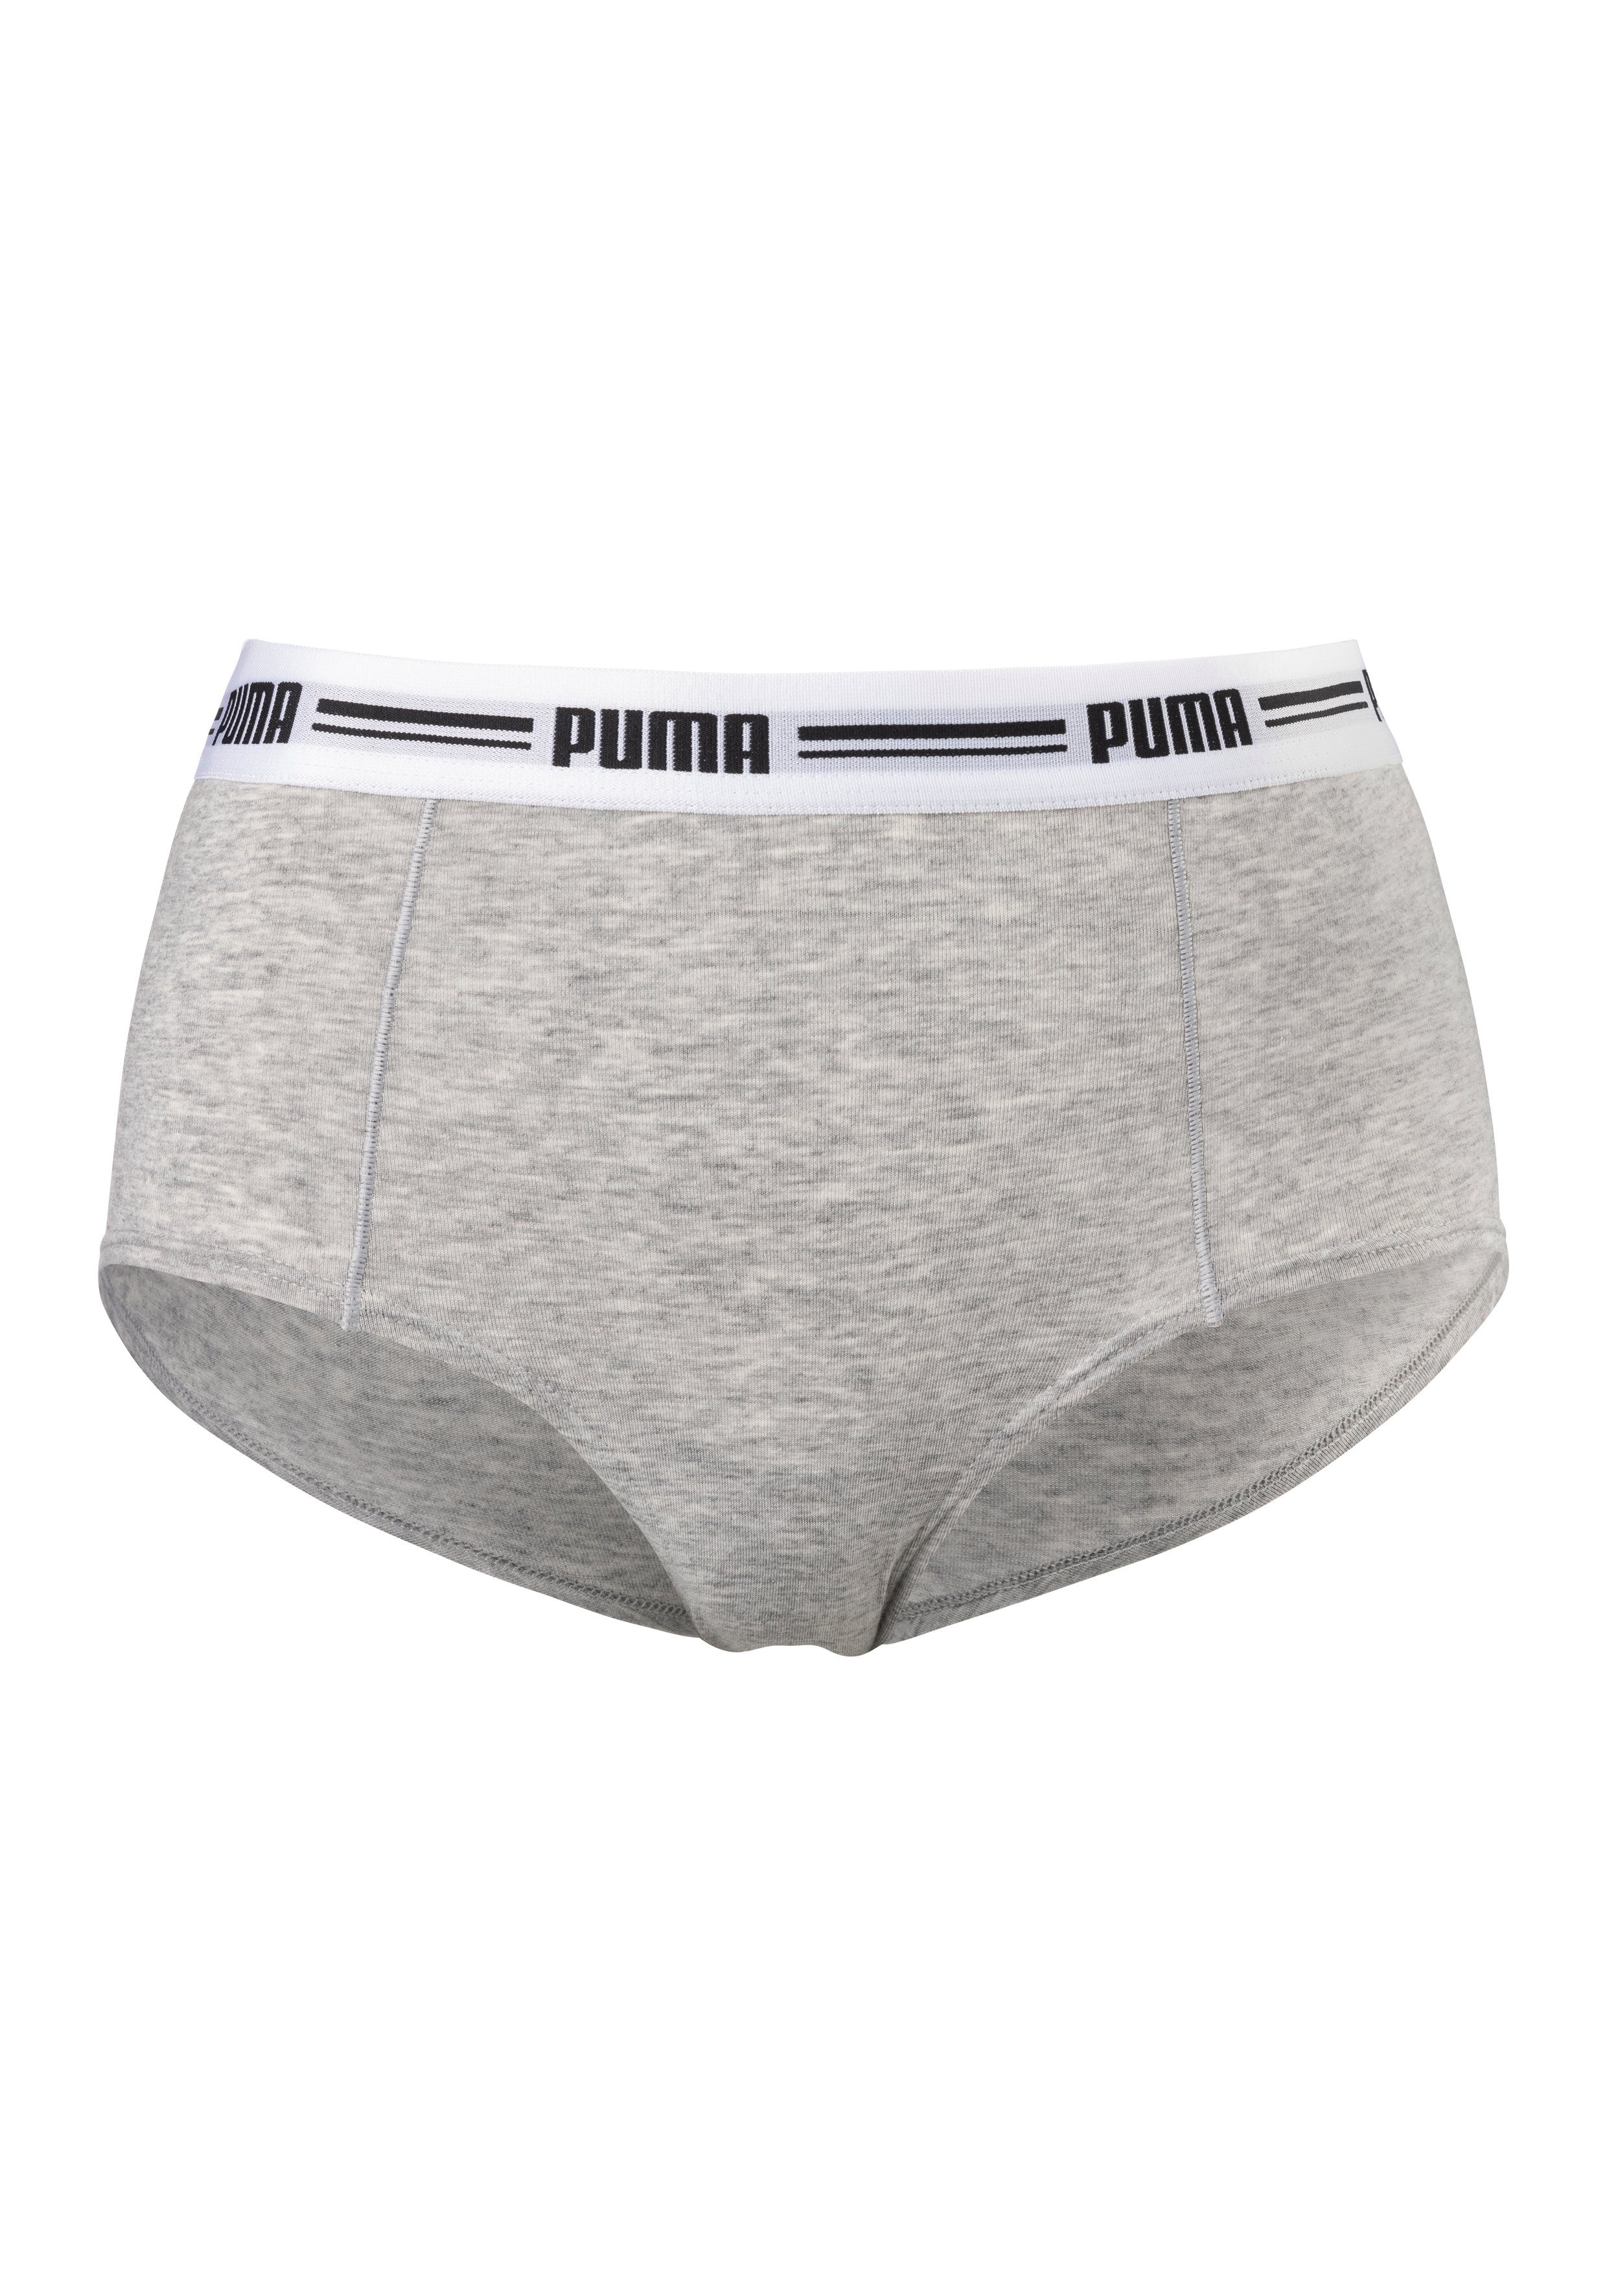 grau-meliert Panty 2-St) Iconic (Packung, PUMA